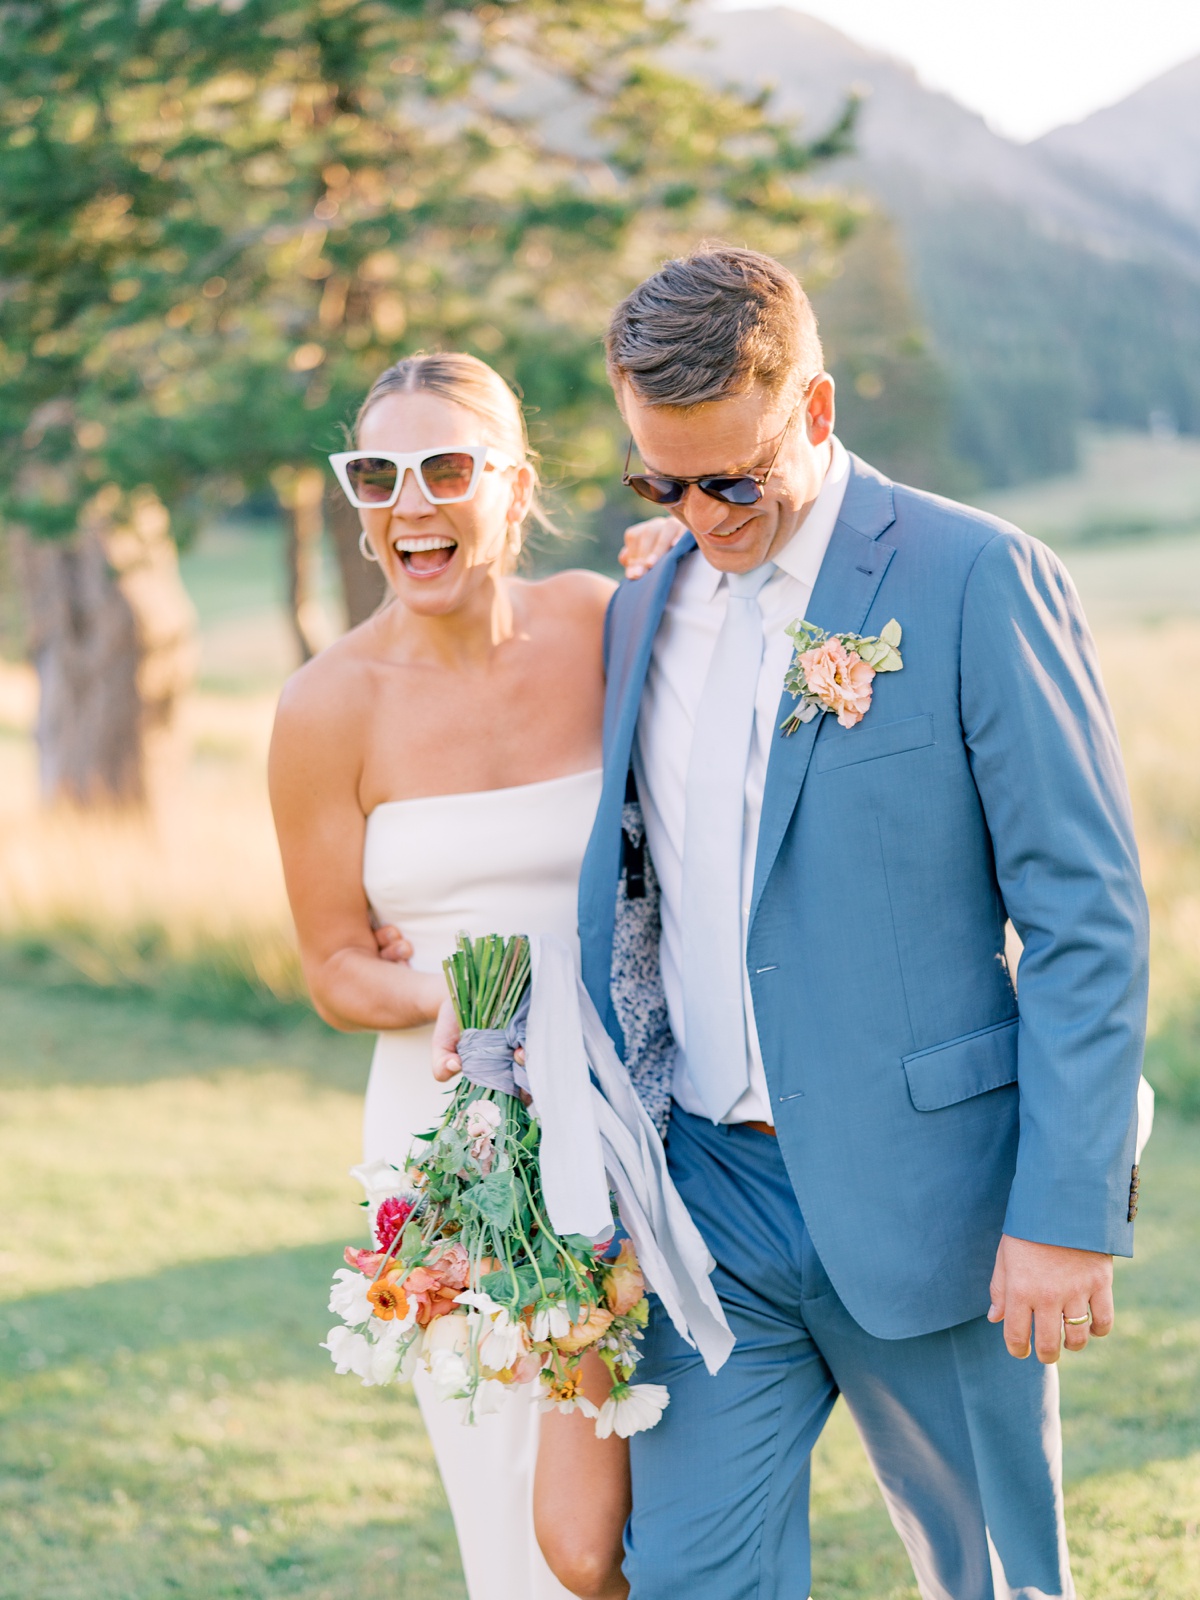 Candid bride and groom portrait in sunglasses | Shot by Mandy Ford Photography